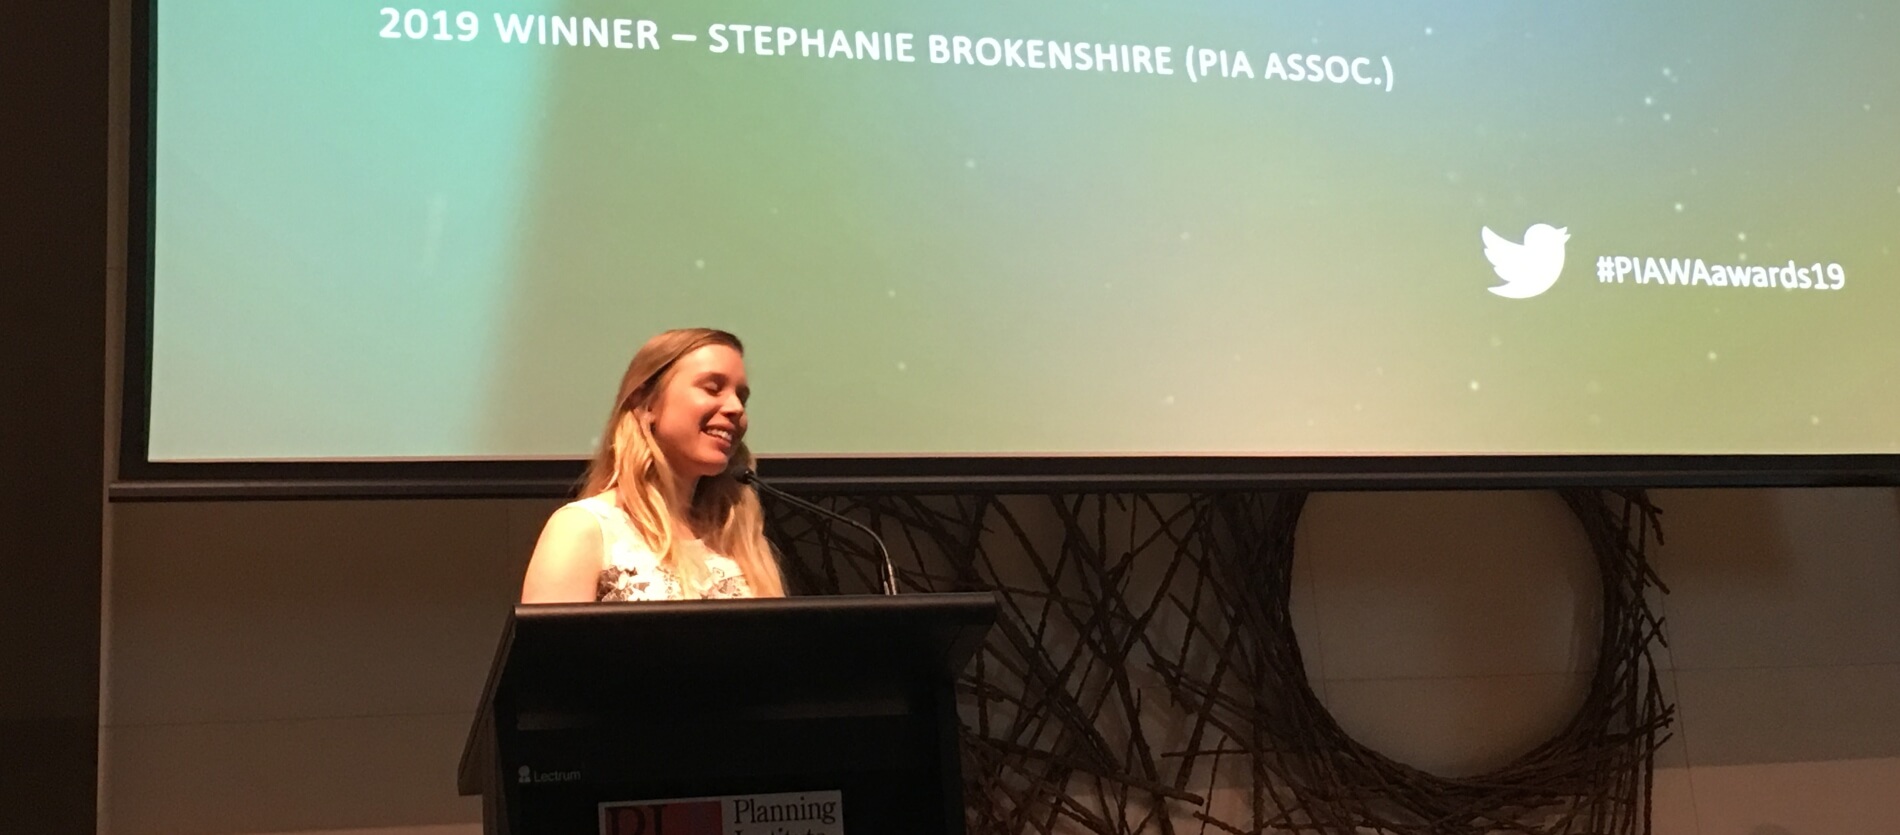 Stephanie Brokenshire, the 2019 Young Planner of the Year winner speaking at the podium